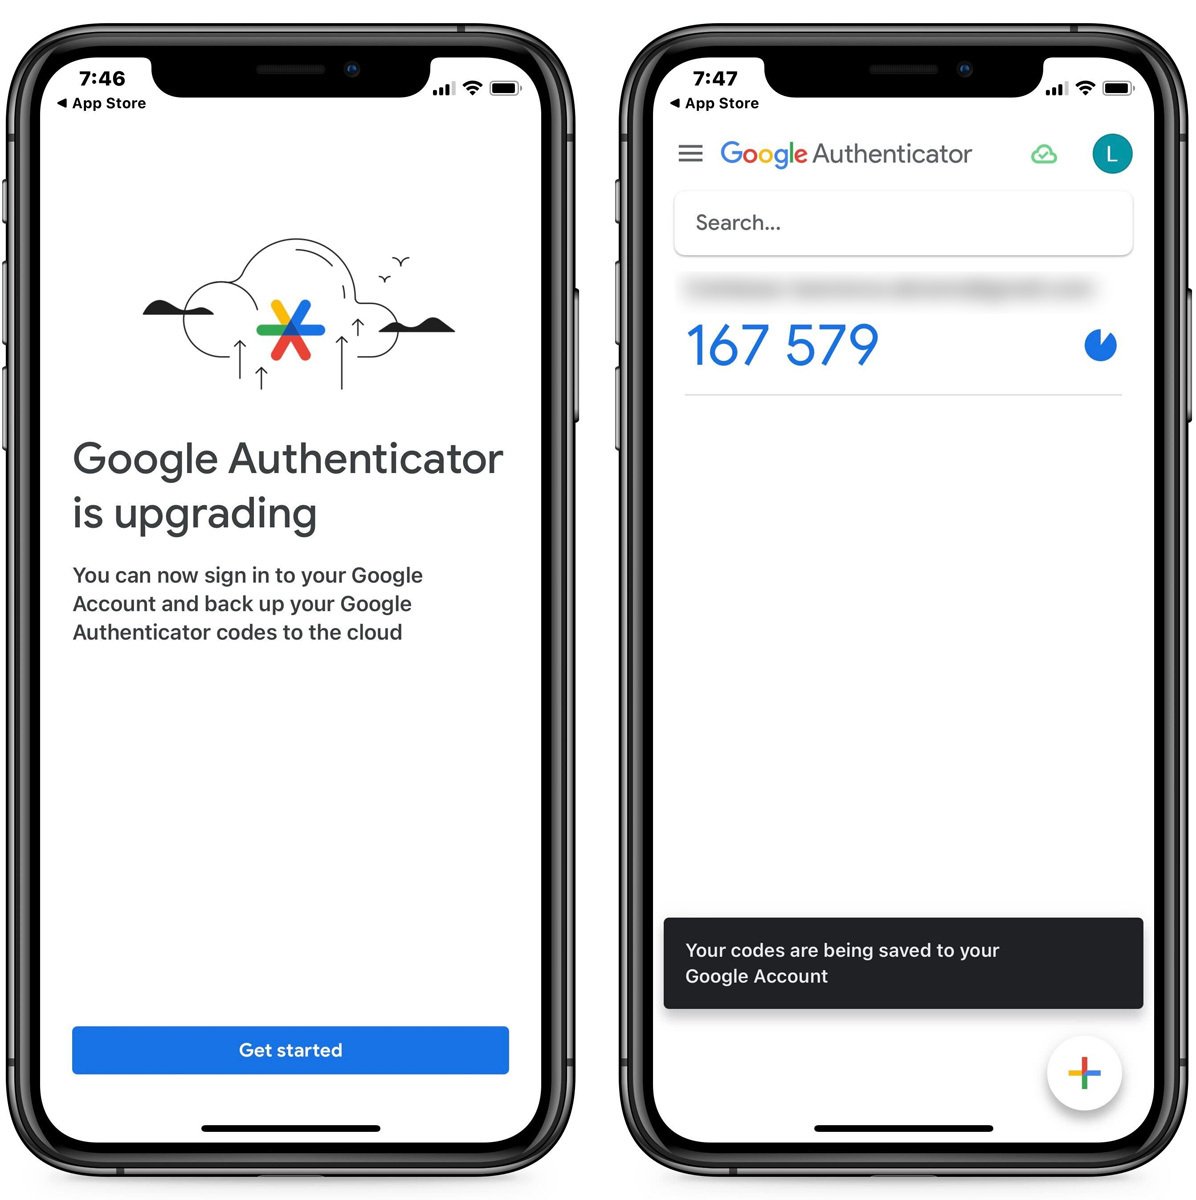 New prompt on Google Authenticator for iOS